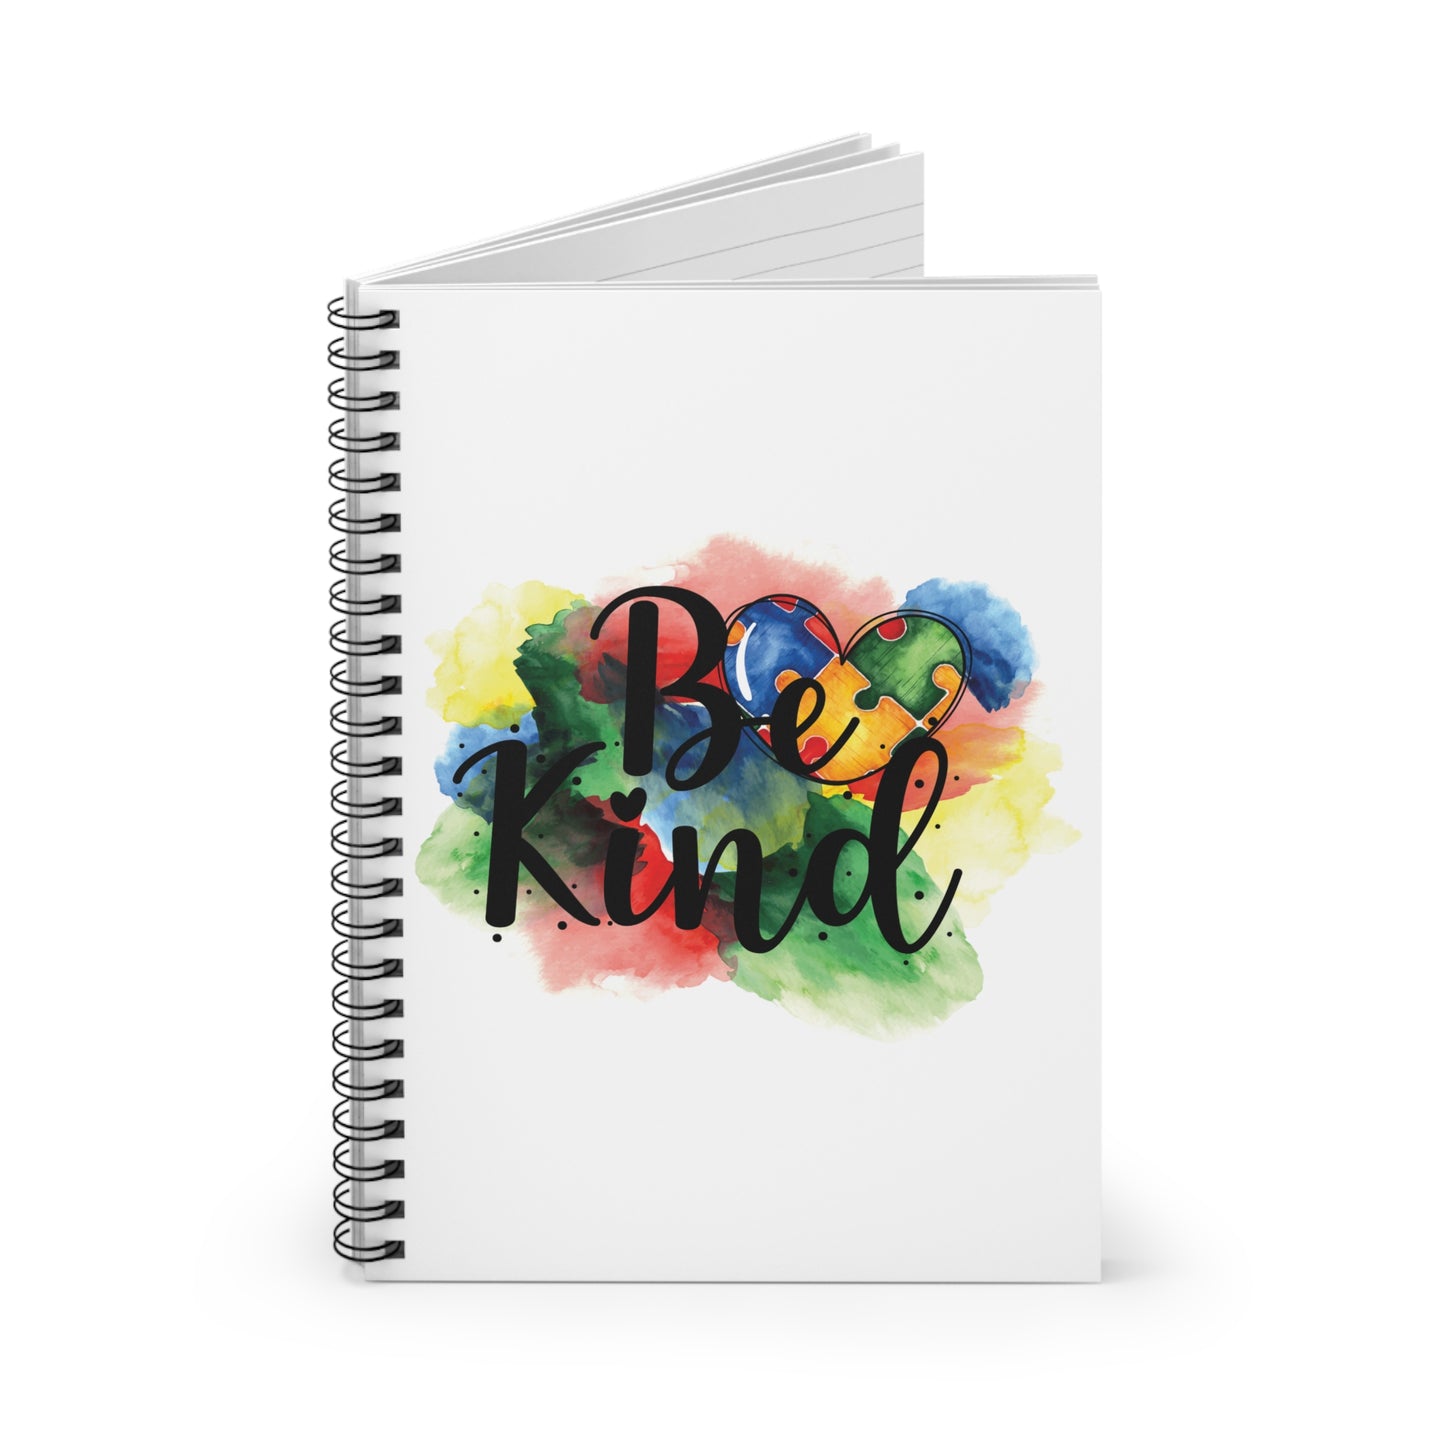 Be Kind Autism Aware: Spiral Notebook - Log Books - Journals - Diaries - and More Custom Printed by TheGlassyLass